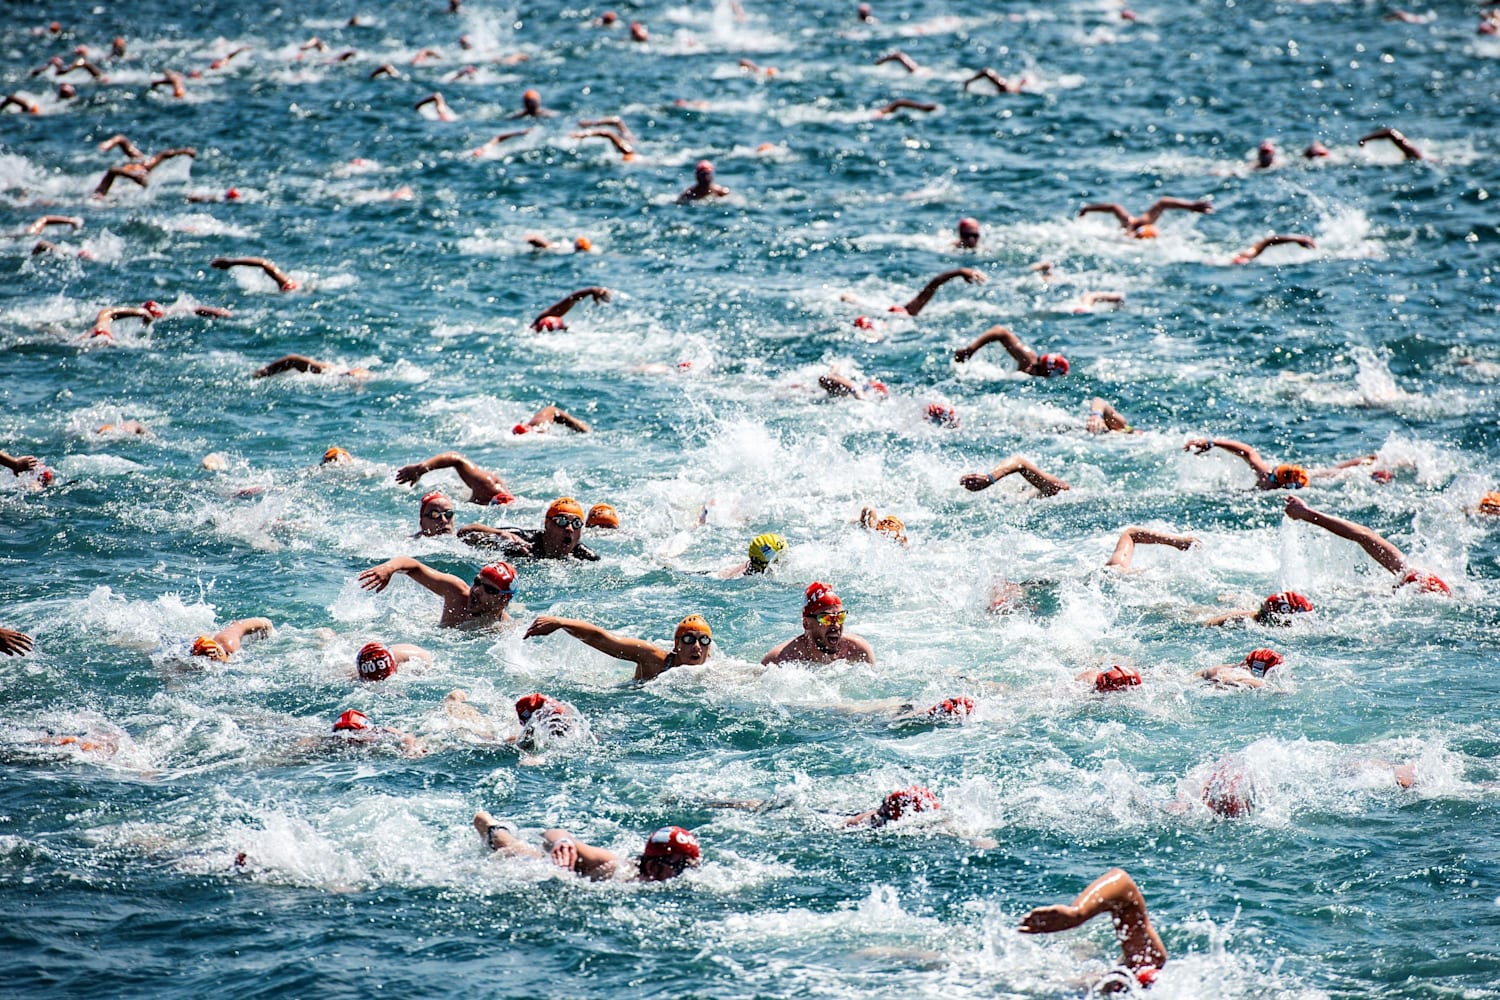 Toughest swimming challenges in the world The top 8